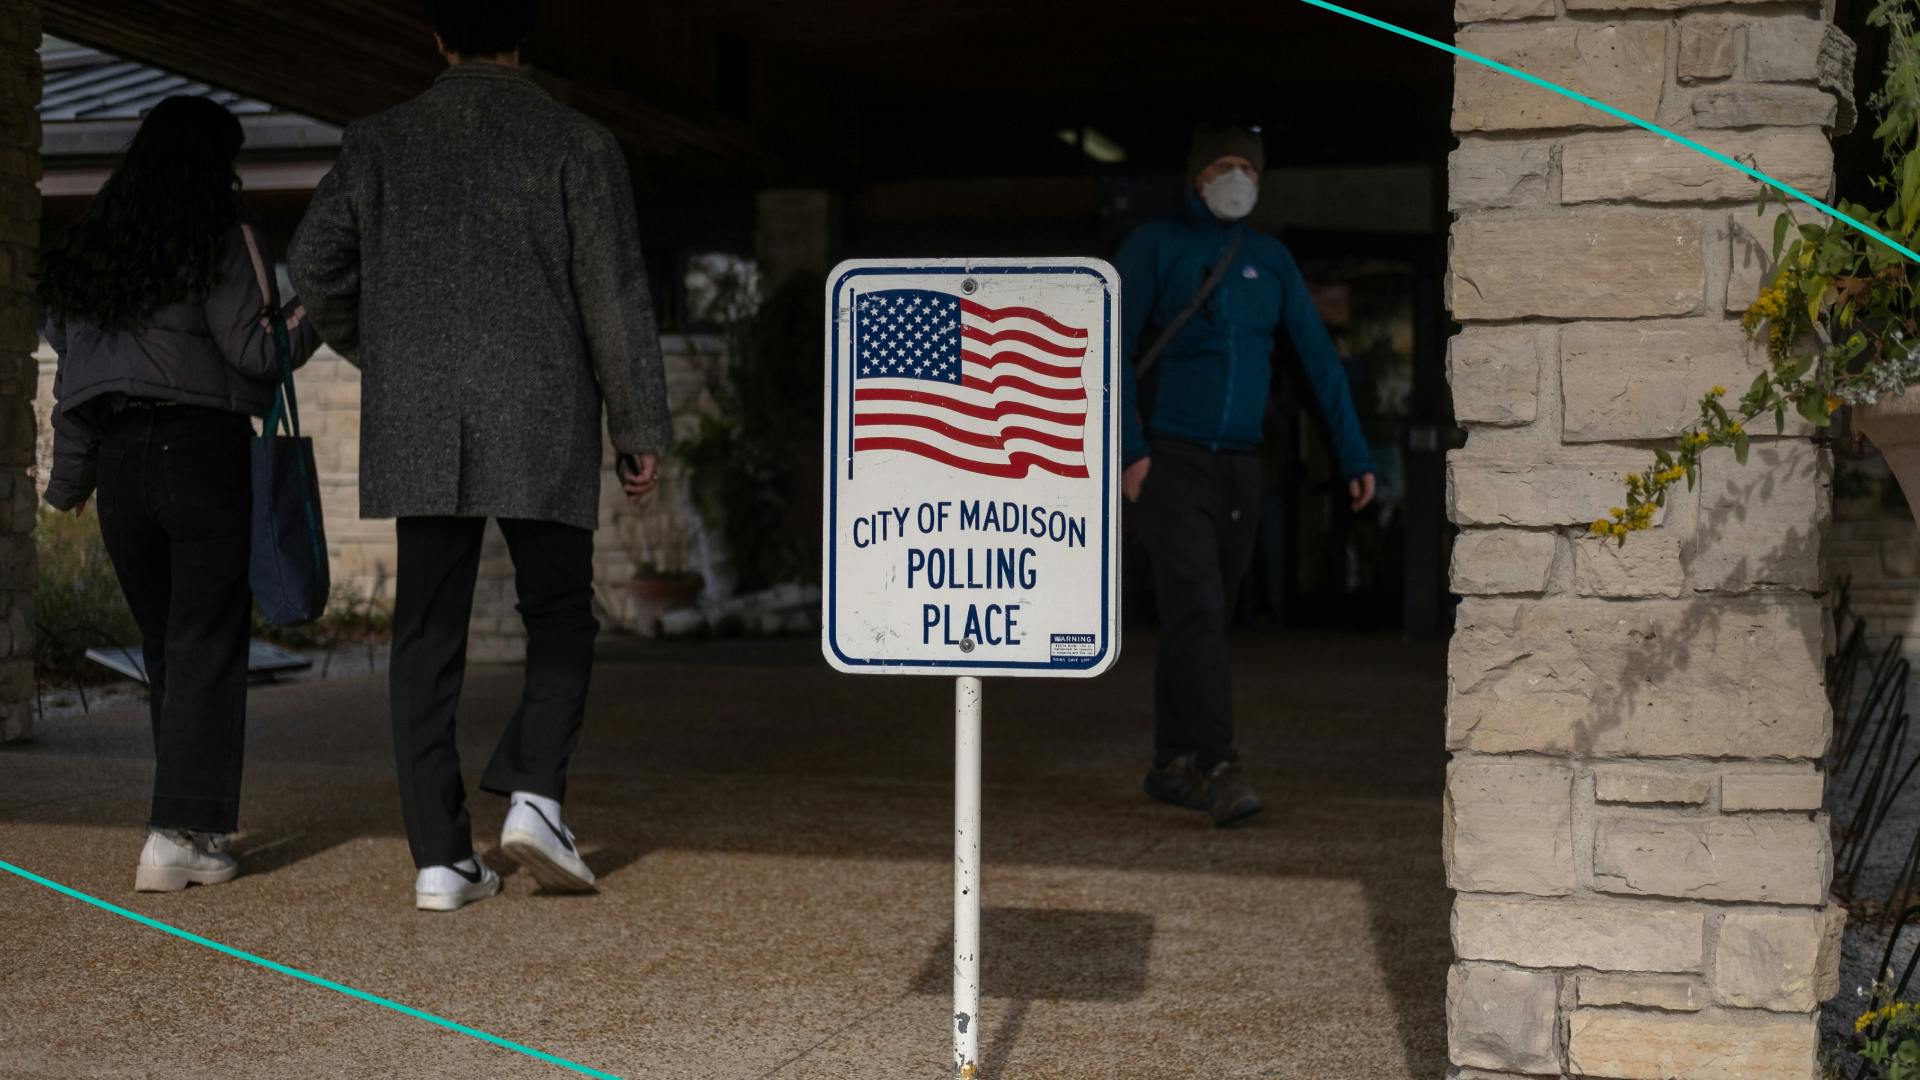 Americans head to the polls to vote at the Olbrich Botanical Gardens on November 8, 2022 in Madison, Wisconsin. After months of candidates campaigning, Americans are voting in the midterm elections to decide close races across the nation.